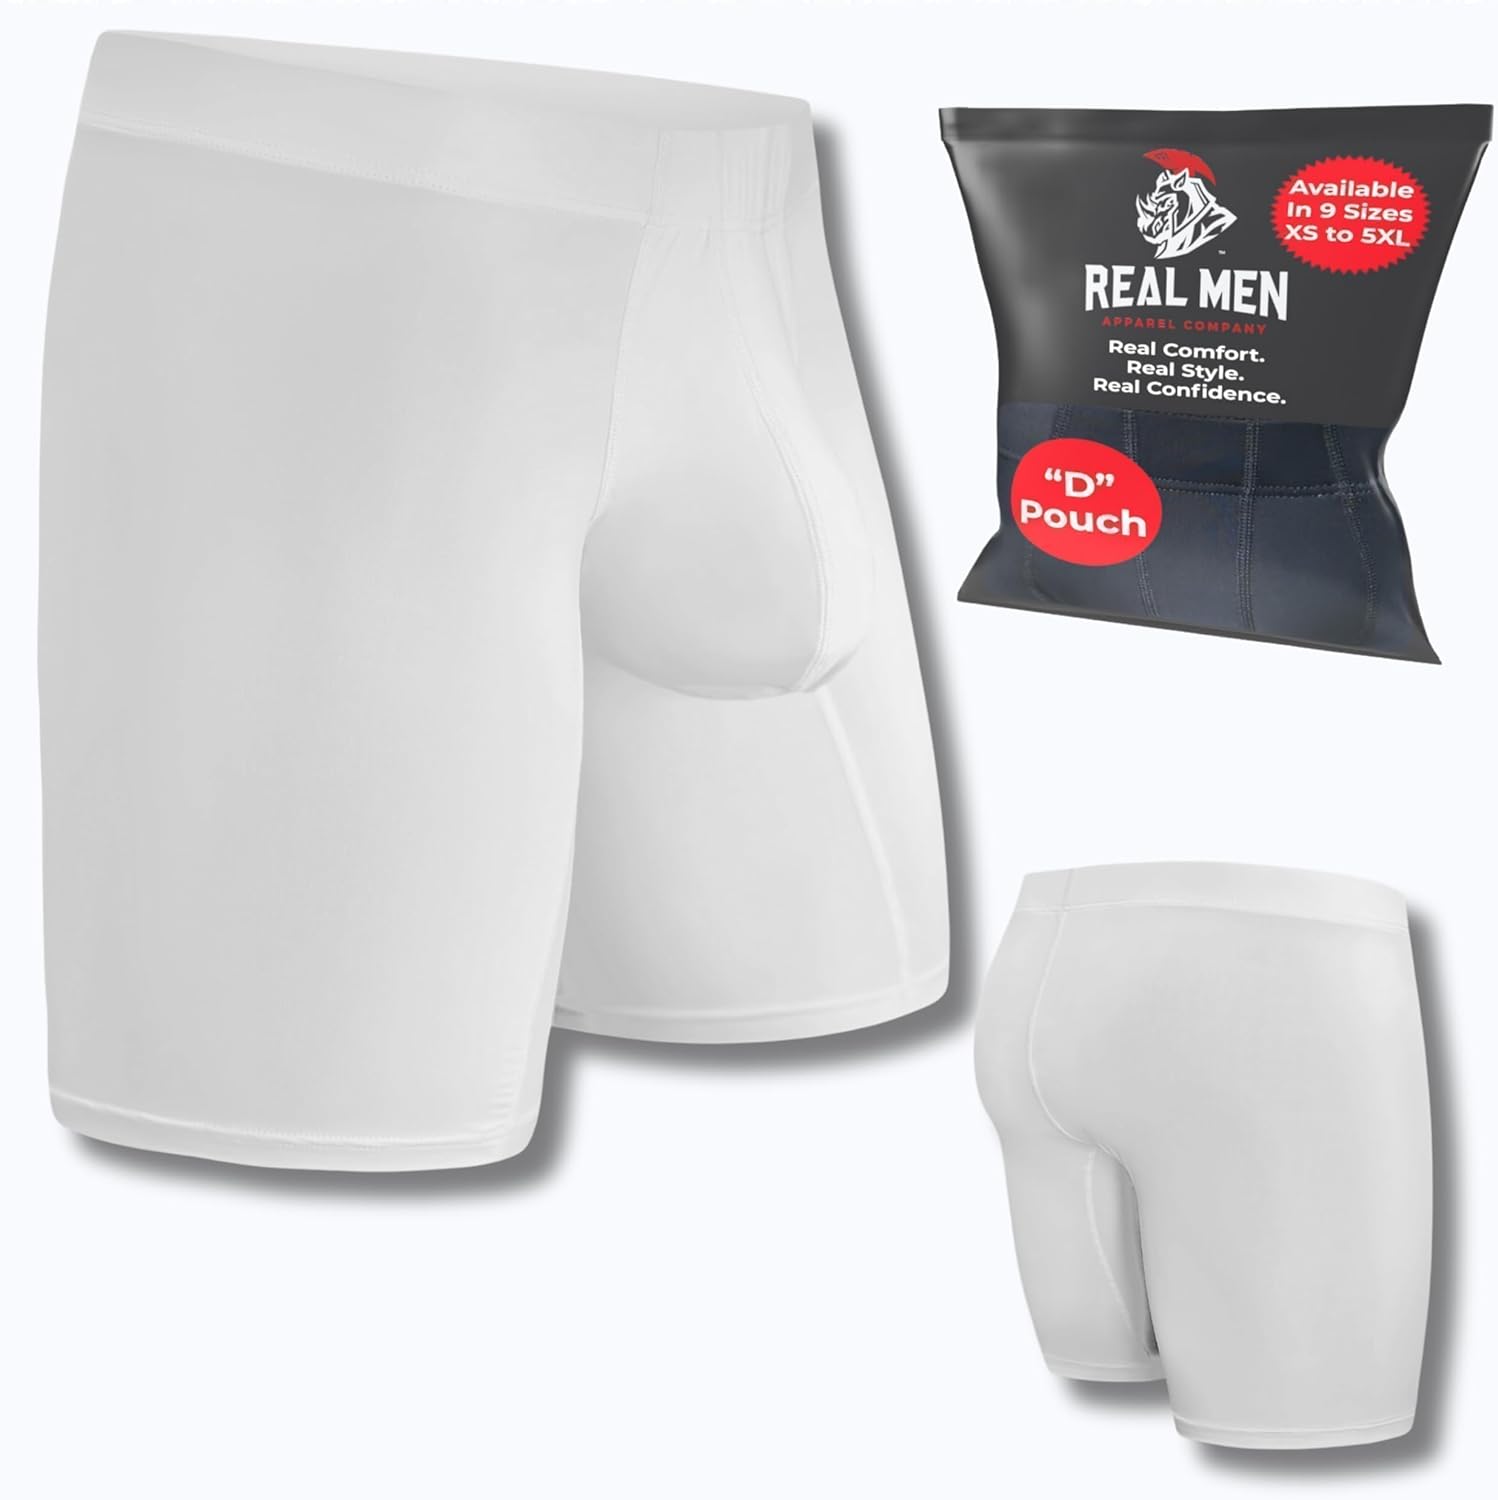 Real Men Athletic Underwear with Support Pouch - 1 or 4 Pack 9in Nylon  Briefs - Size B or D Pouch - XS-5XL